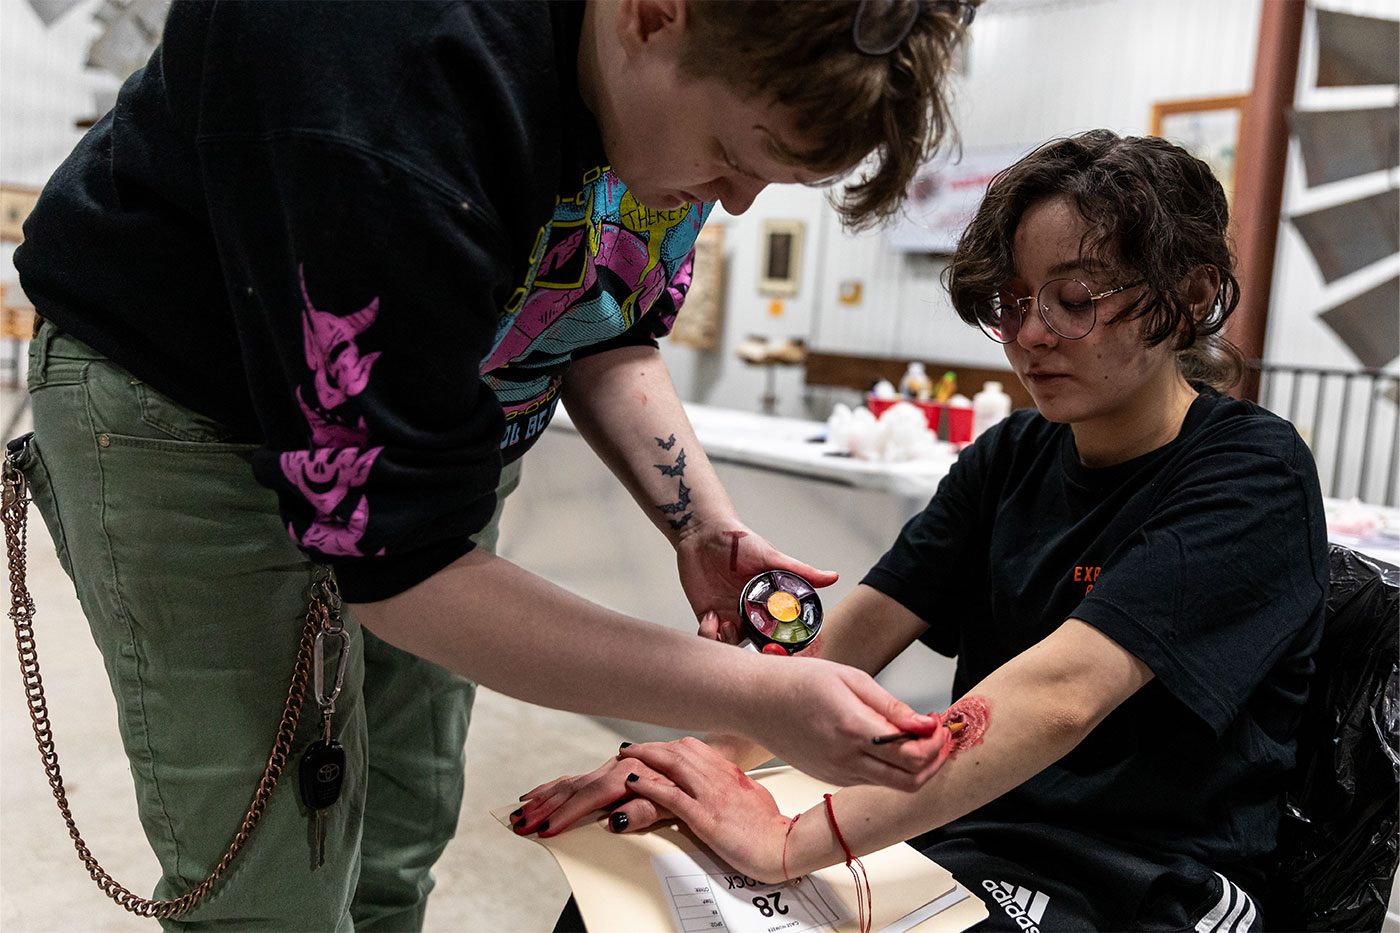 Applying moulage to a student's arm. 